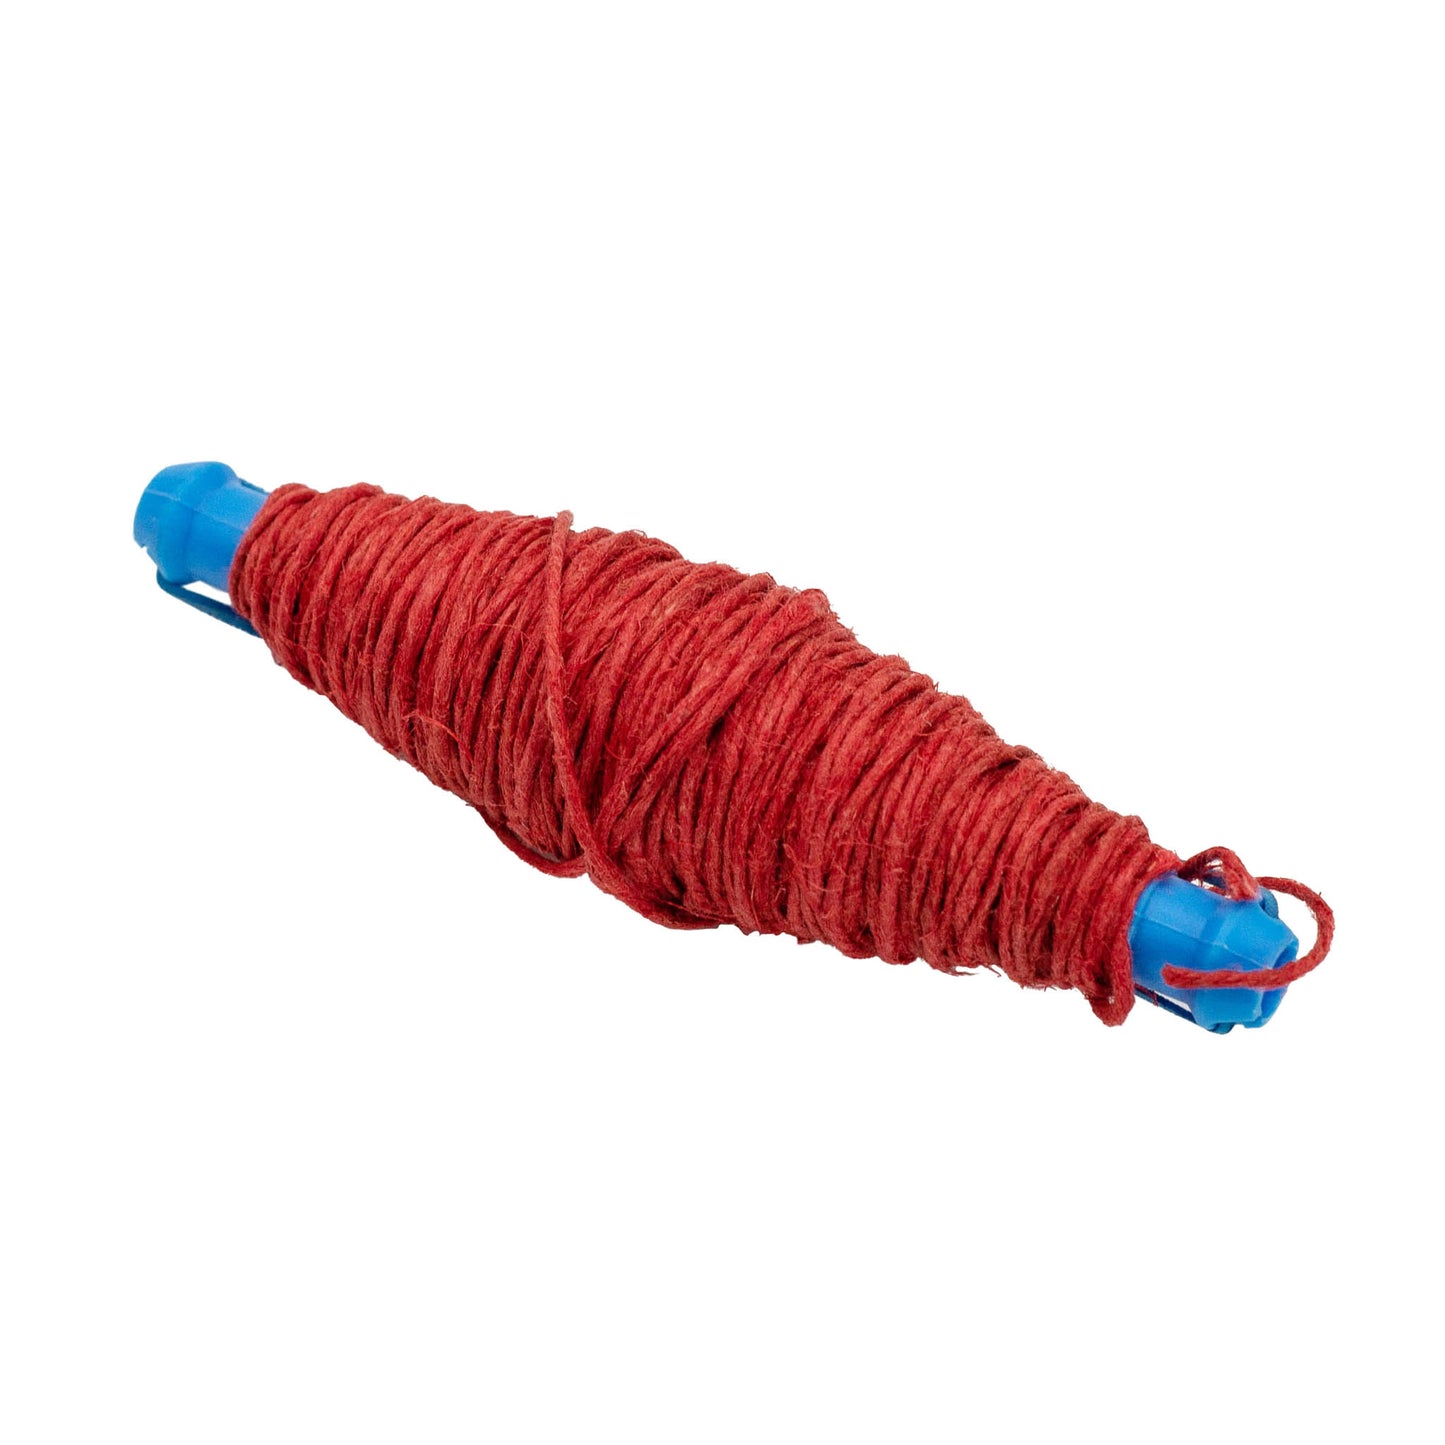 small ball of red string for tying hot salami